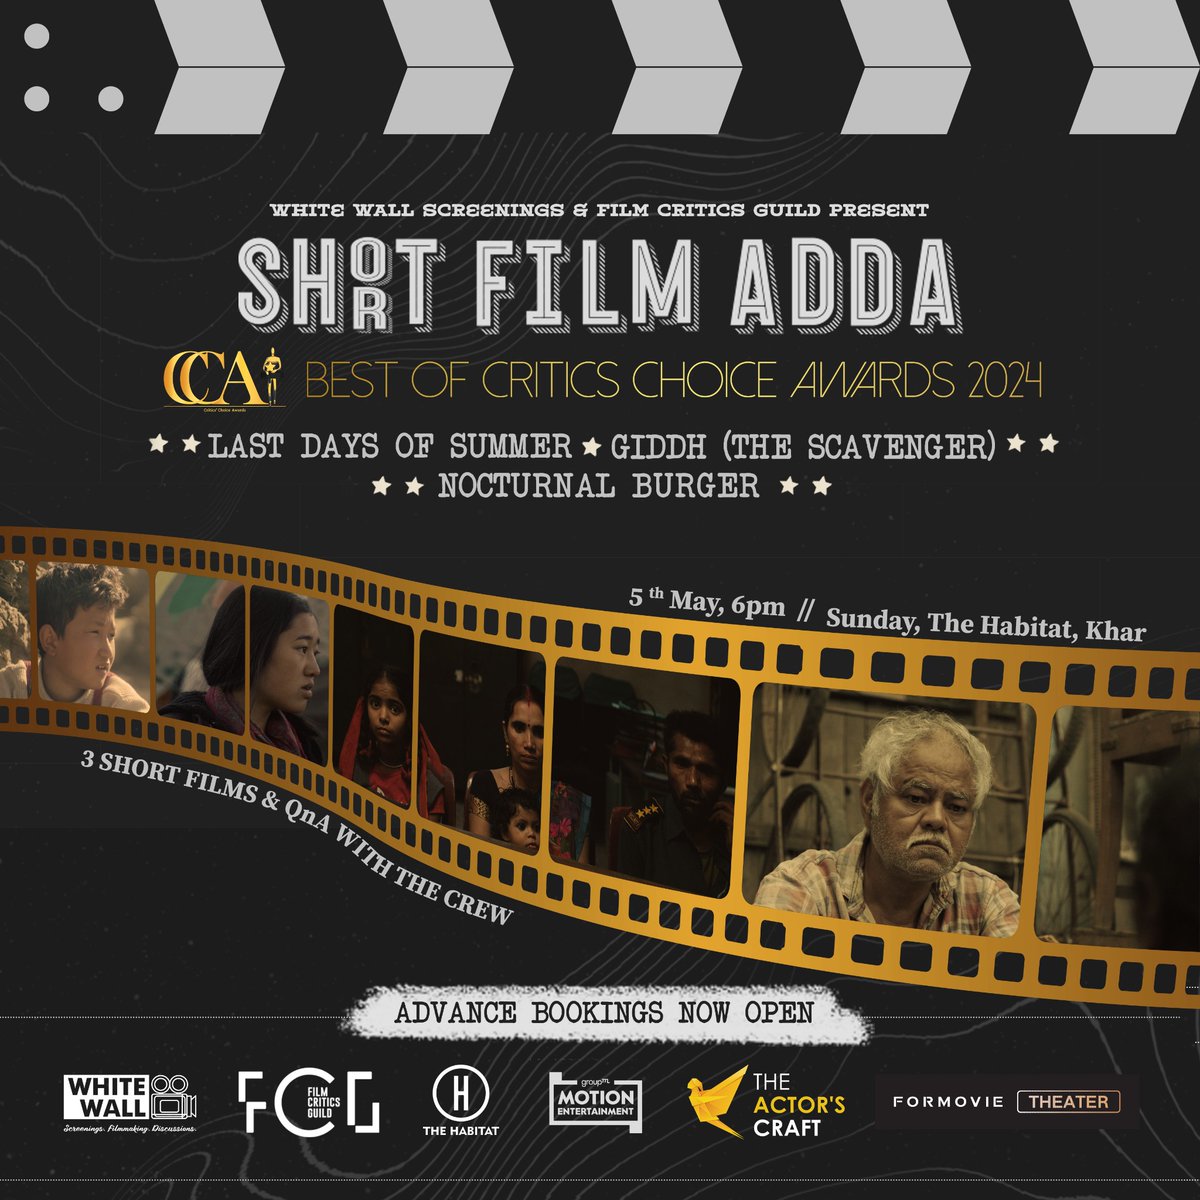 Do join us for the screening of these delightful shorts followed by QnA with the crew in.bookmyshow.com/events/white-w… In association with @theFCGofficial we present Short Film Adda - Best of @CriticsChoiceIn 2024 @ReemaSengupta @Manishsaini03 @stenzin @abhradas1 @anupamachopra